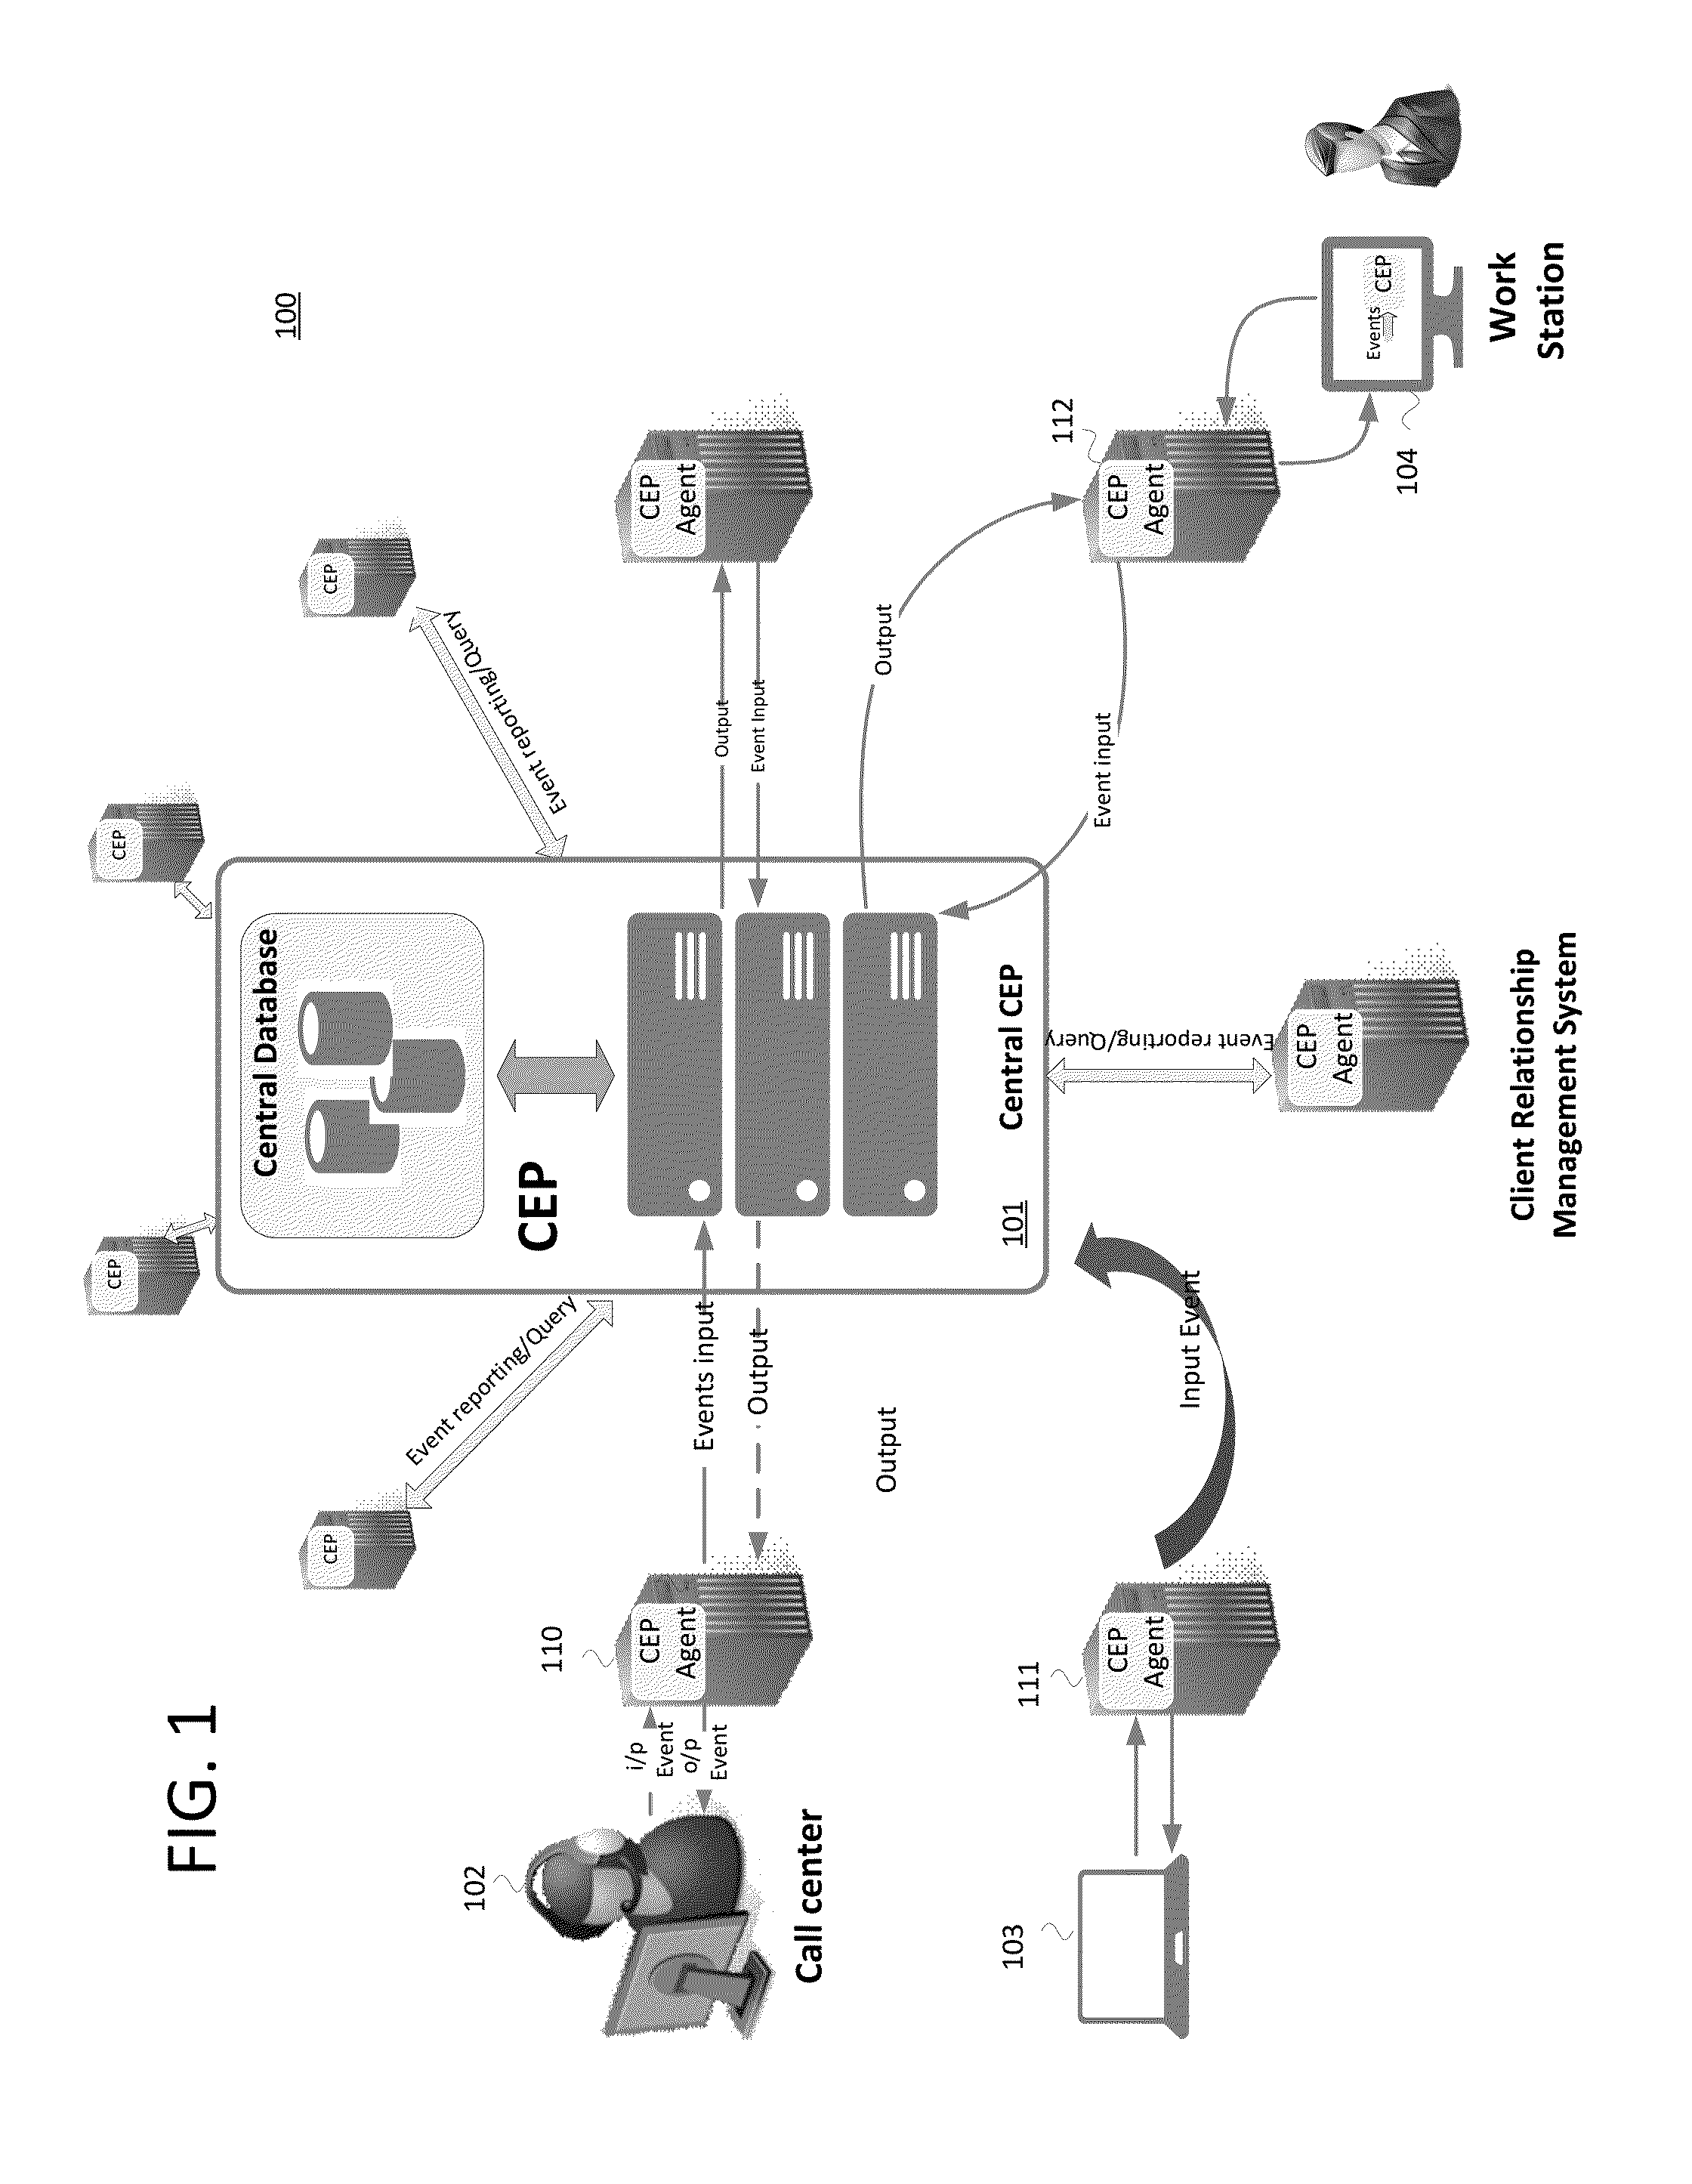 Modification of Computing Resource Behavior Based on Aggregated Monitoring Information